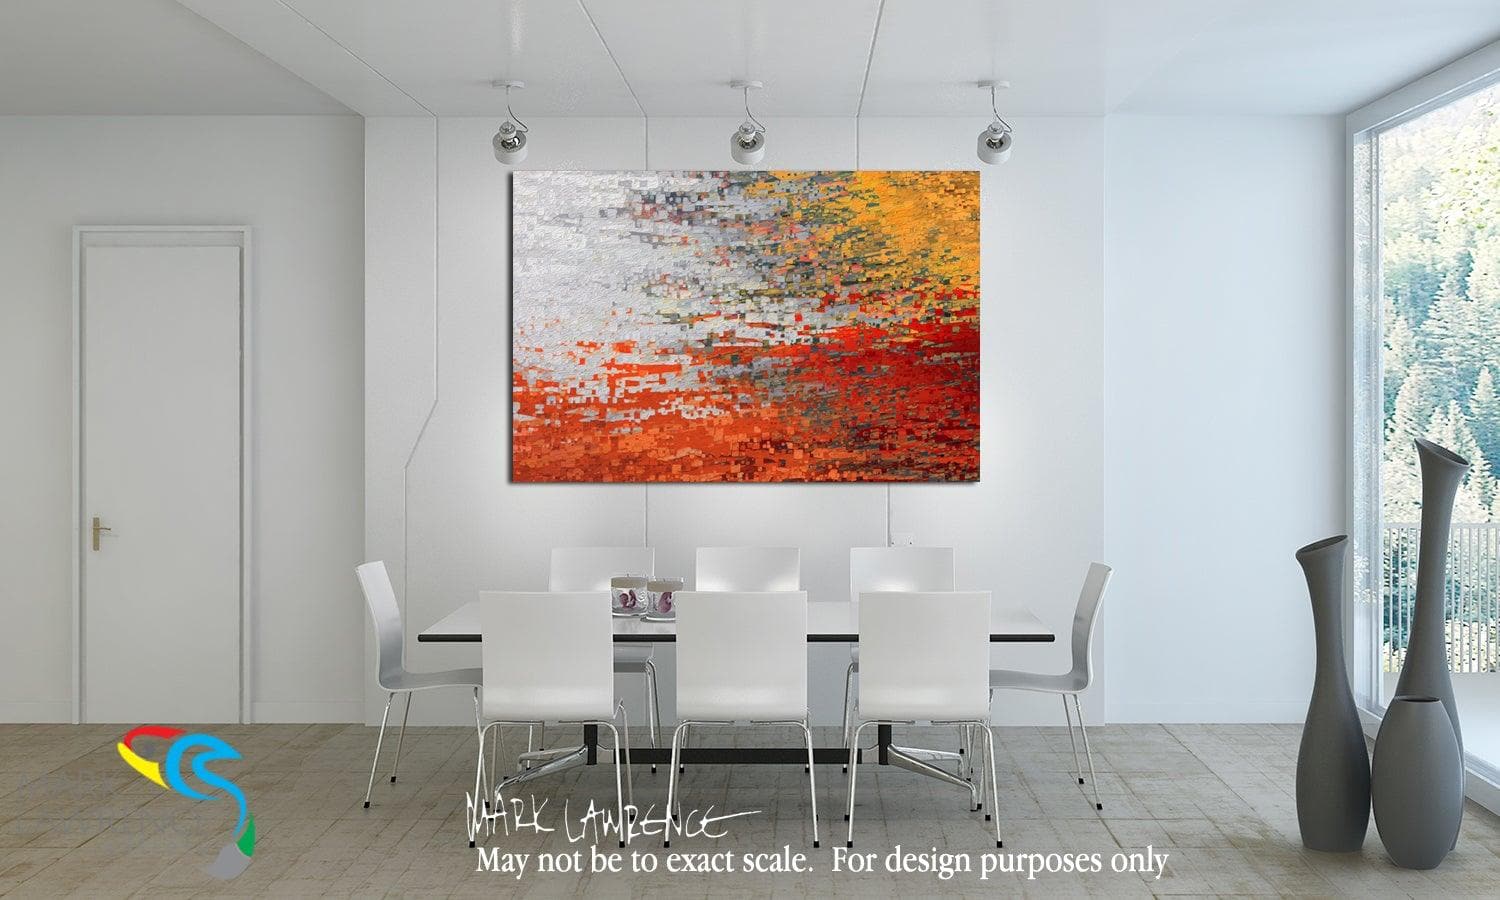 Interior Design Inspiration. John 14:10. The Privilege Of Knowing God. Limited Edition Christian Modern Art. Ultra-hand embellished and textured with rich brush strokes by the artist. Signed & numbered brightly colored Christian abstract art. Do you not believe that I am in the Father, and the Father in Me? The words that I speak to you I do not speak on My own authority; but the Father who dwells in Me does the works. John 14:10